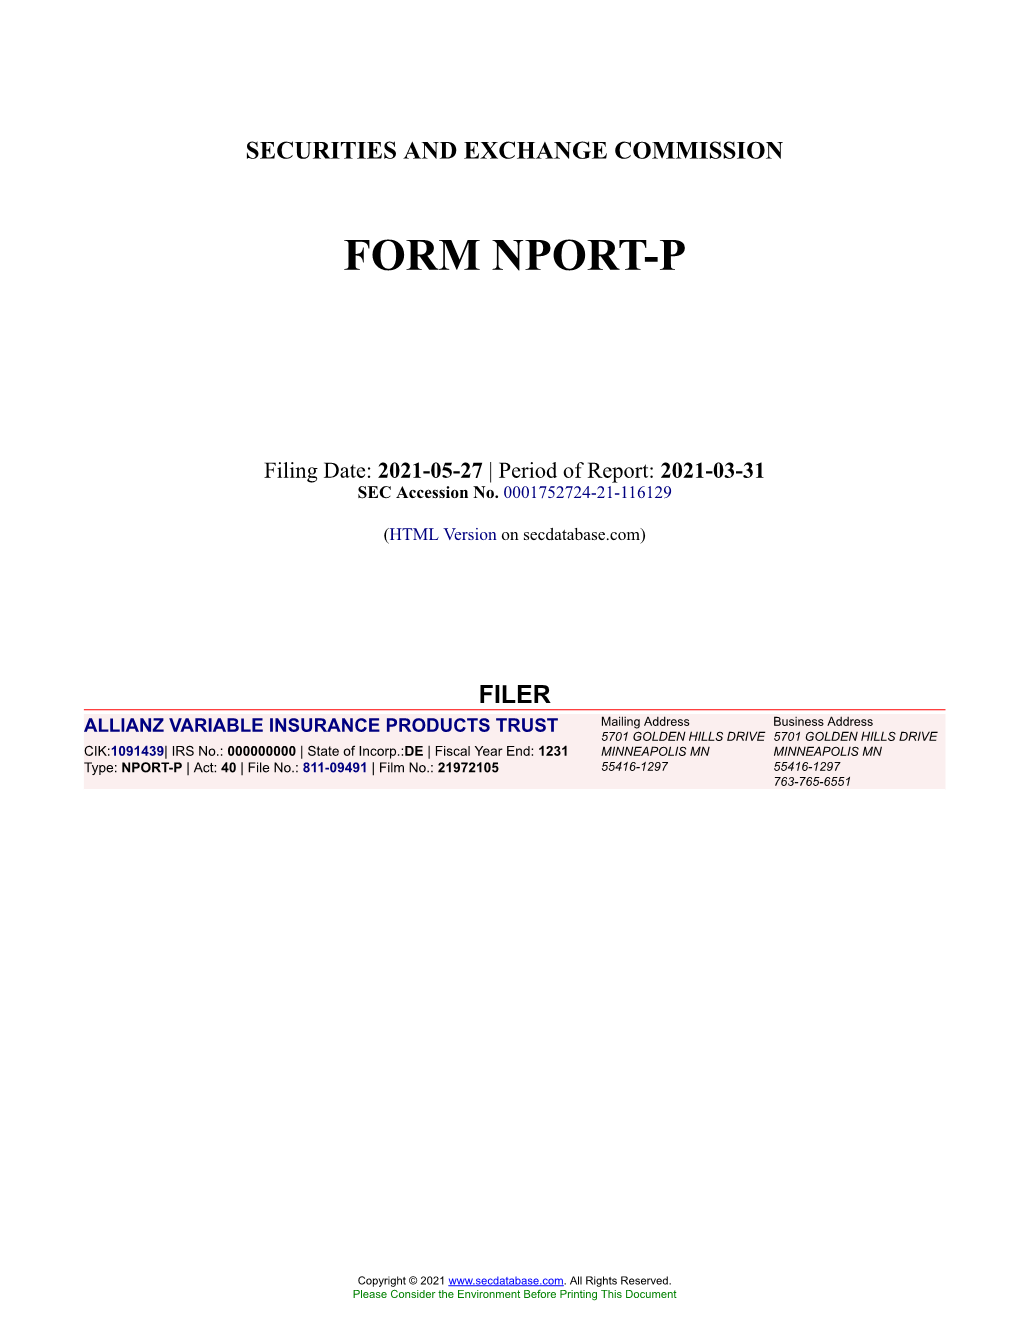 ALLIANZ VARIABLE INSURANCE PRODUCTS TRUST Form NPORT